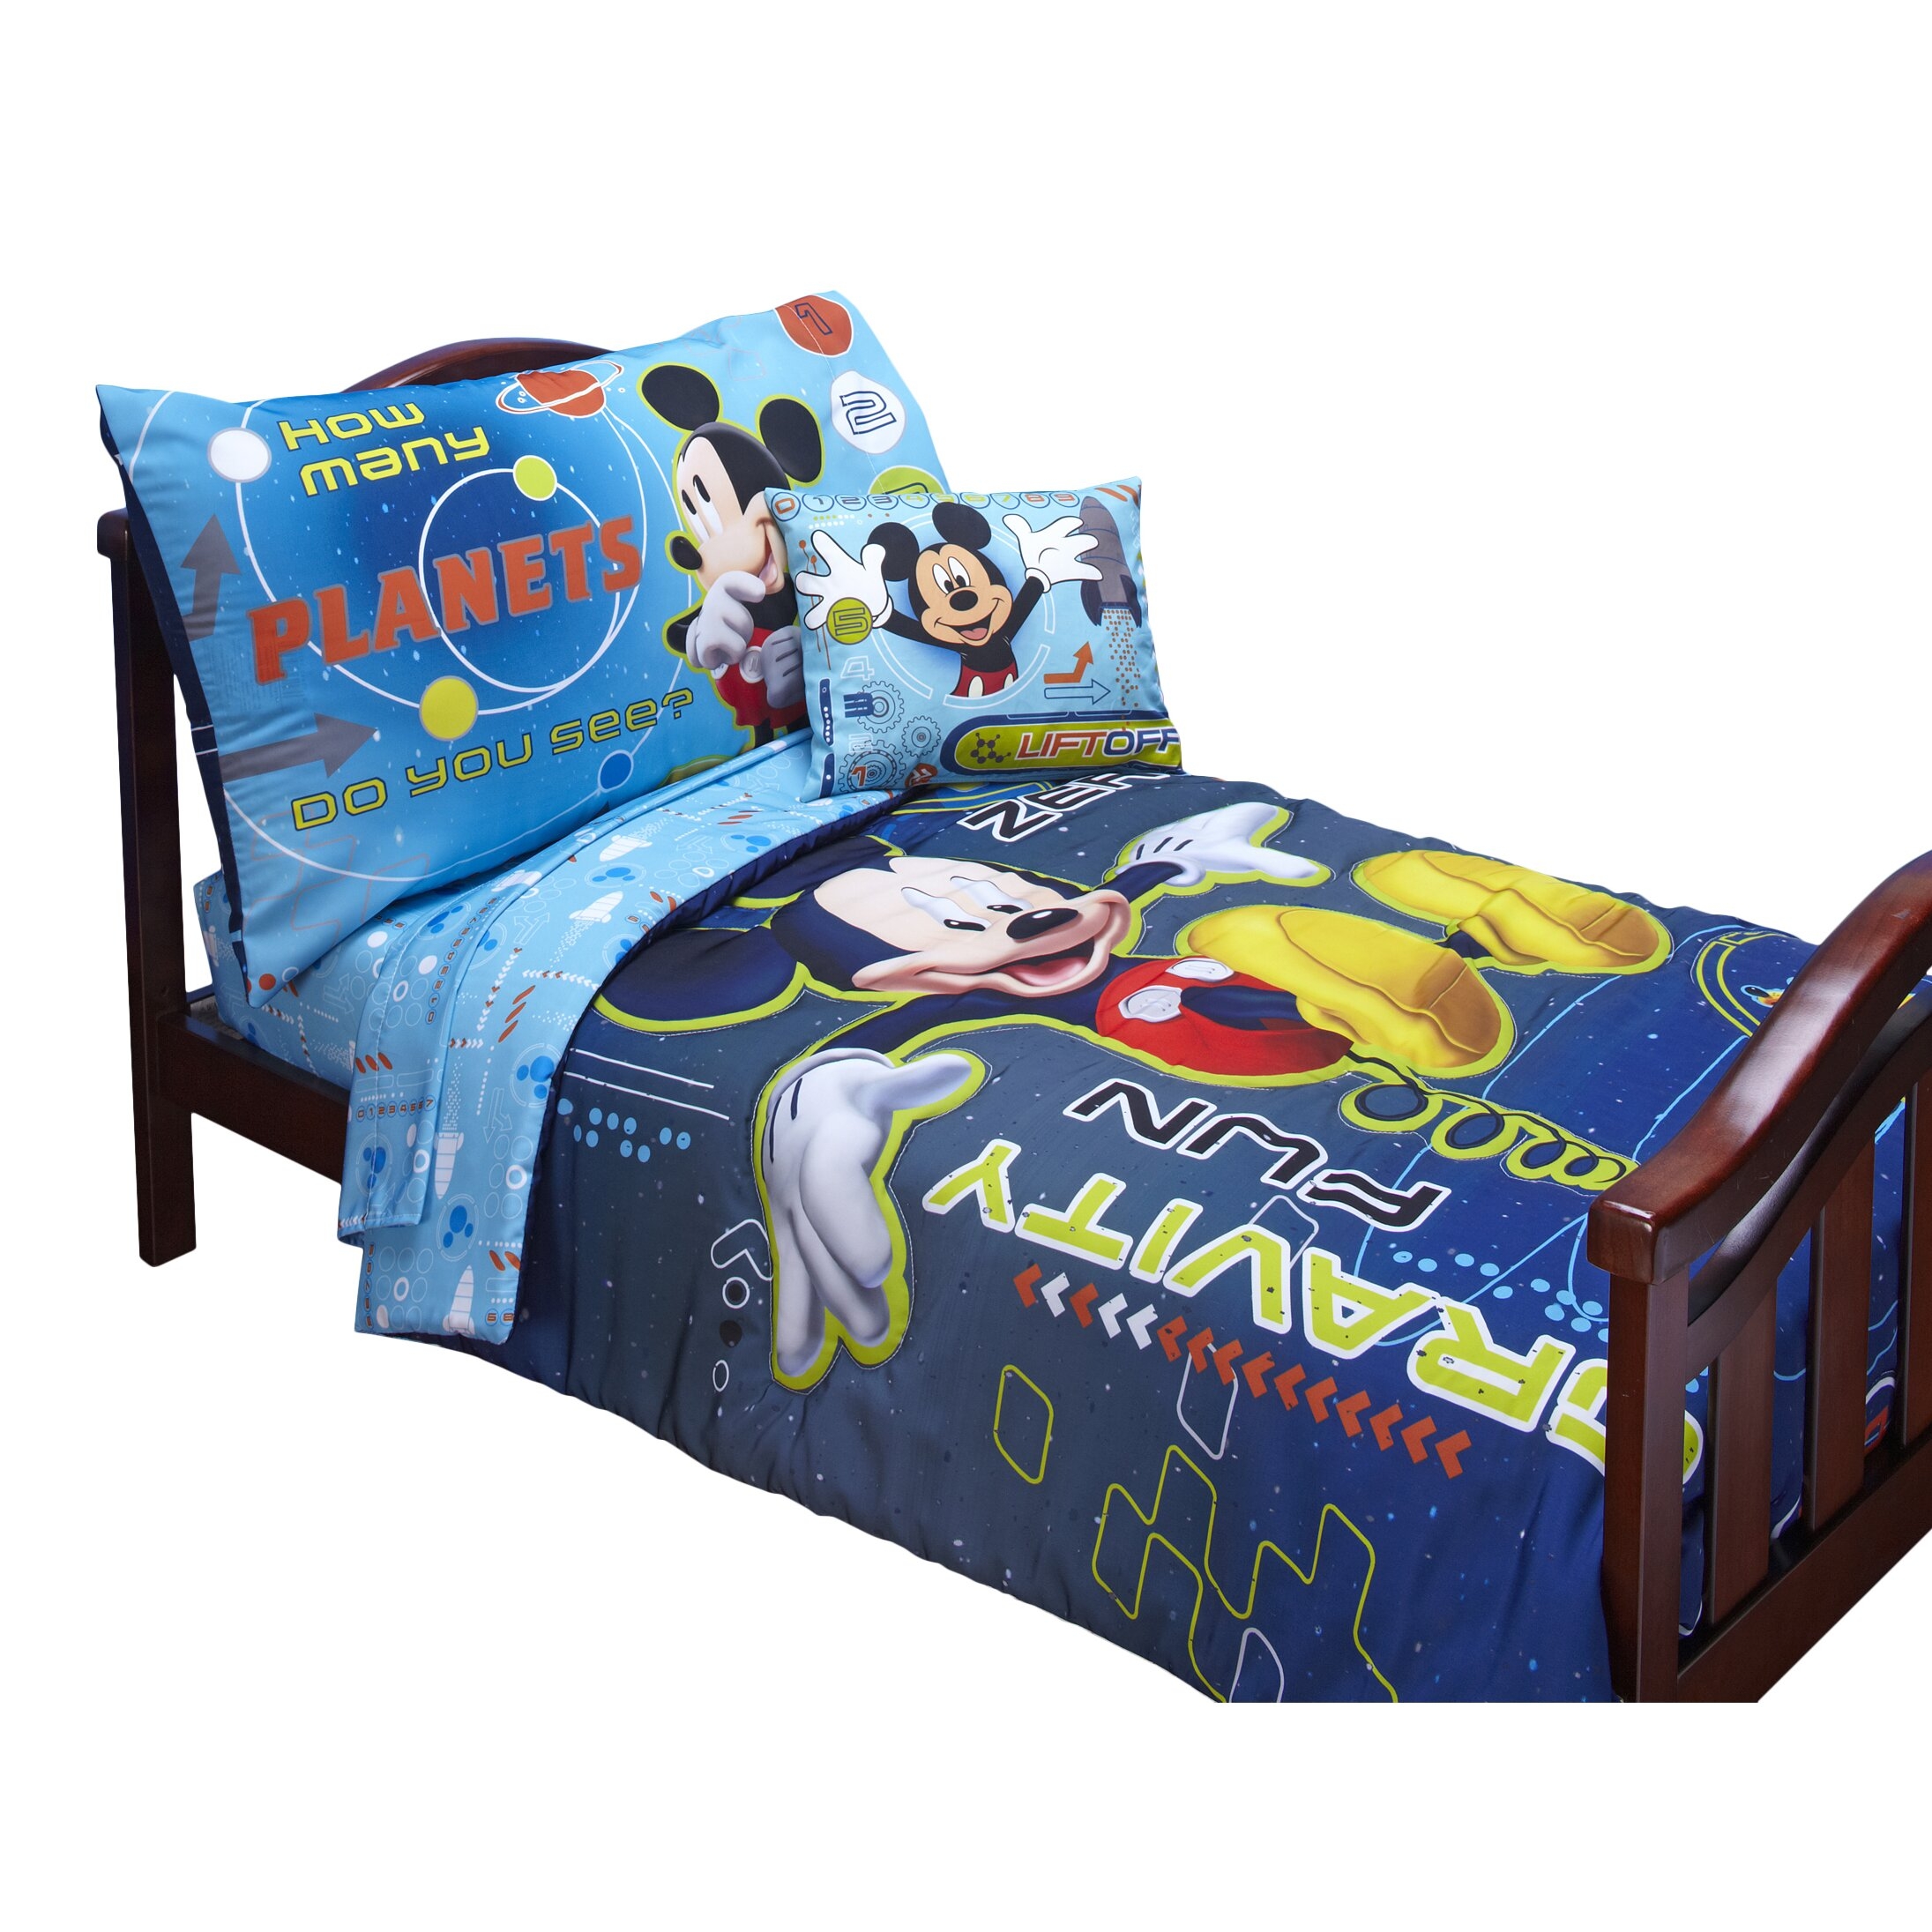 Mickey And The Roadster Racers Disney 4 Piece Toddler Bedding Set 